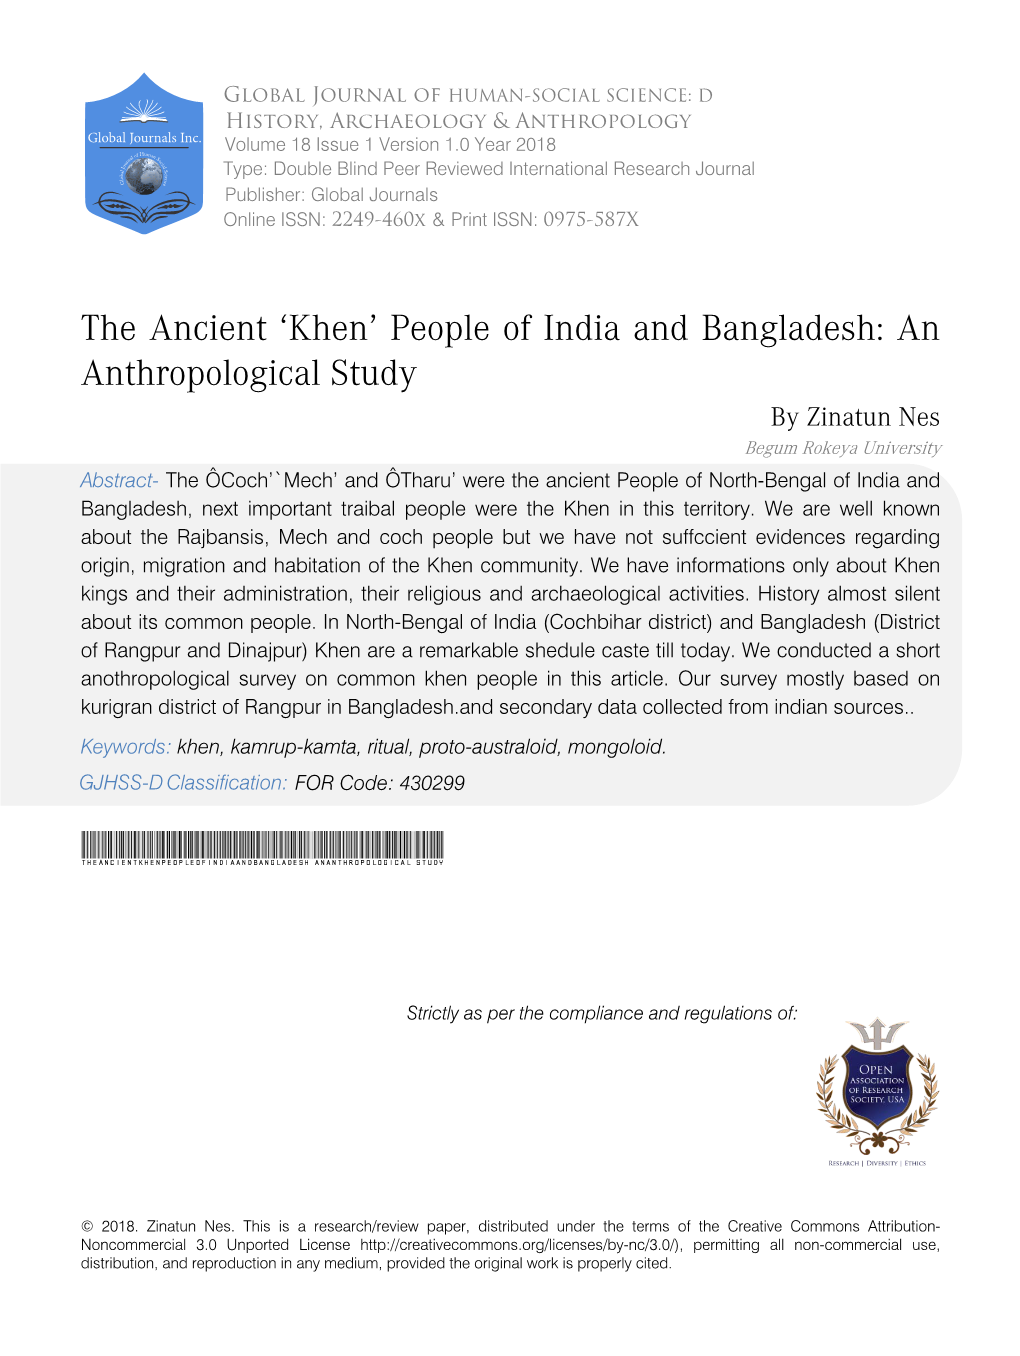 The Ancient 'Khen' People of India and Bangladesh: An